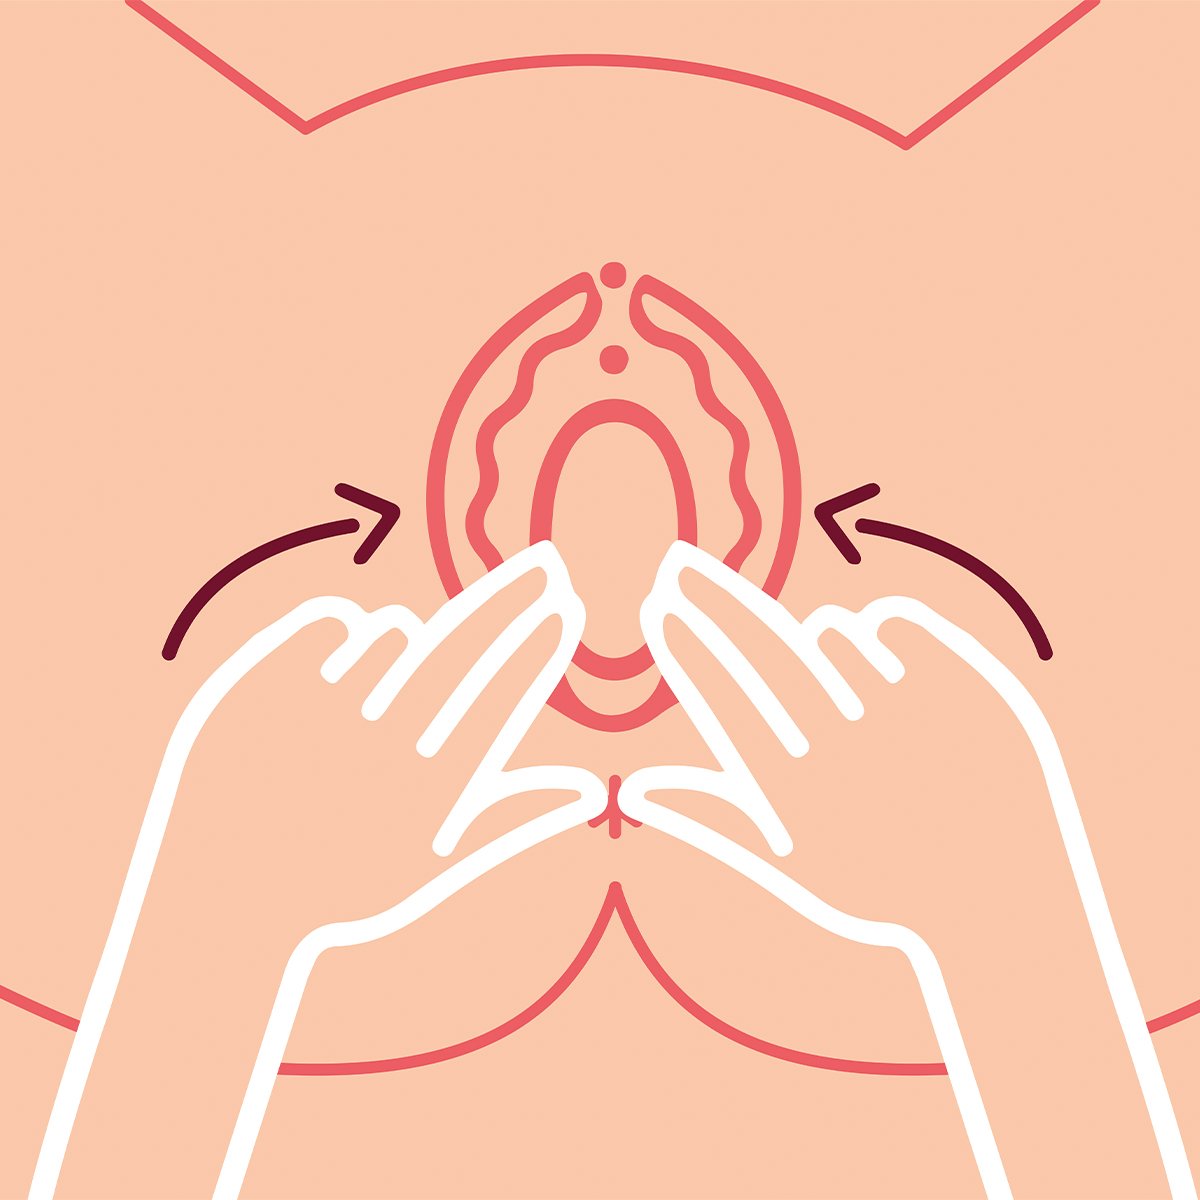 Your partner can start gently massaging your pereneum